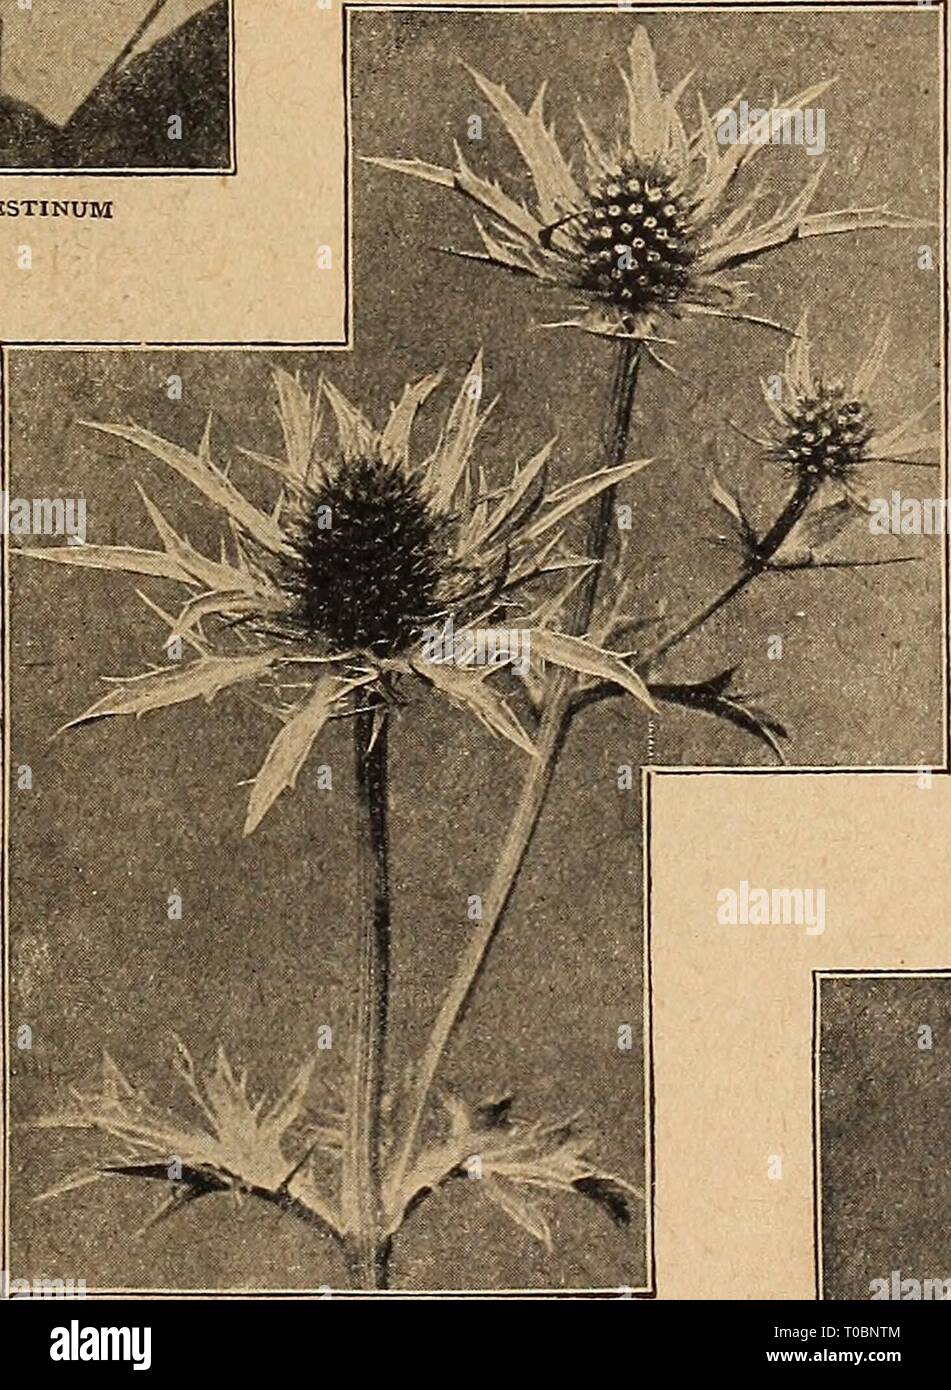 Dreer's garden book 1920 (1920) Dreer's garden book 1920 dreersgardenbook1920henr 0 Year: 1920  EuPATORIUM AGKRATOIDES AND CcELESTINUM ECHINOPS (Globe Thistle) Sphaerocephalus. An interesting thistle-like plant with large globu- lar heads of bluish-white attractive flowers. 3 feet. 25 cts. each; $2.50 per doz. EPIMEDIUM (Barren-wort, Bishop's Hat) Dwarf-growing plants, 8 to 10 inches high, with leathery foliage and panicles of interesting flowers; the foliage of all the varieties offered below .assumes the most beautiful tints of color in autumn. Mushianum Rub rum. Rosy red. Niveum. Dwarf, ear Stock Photo